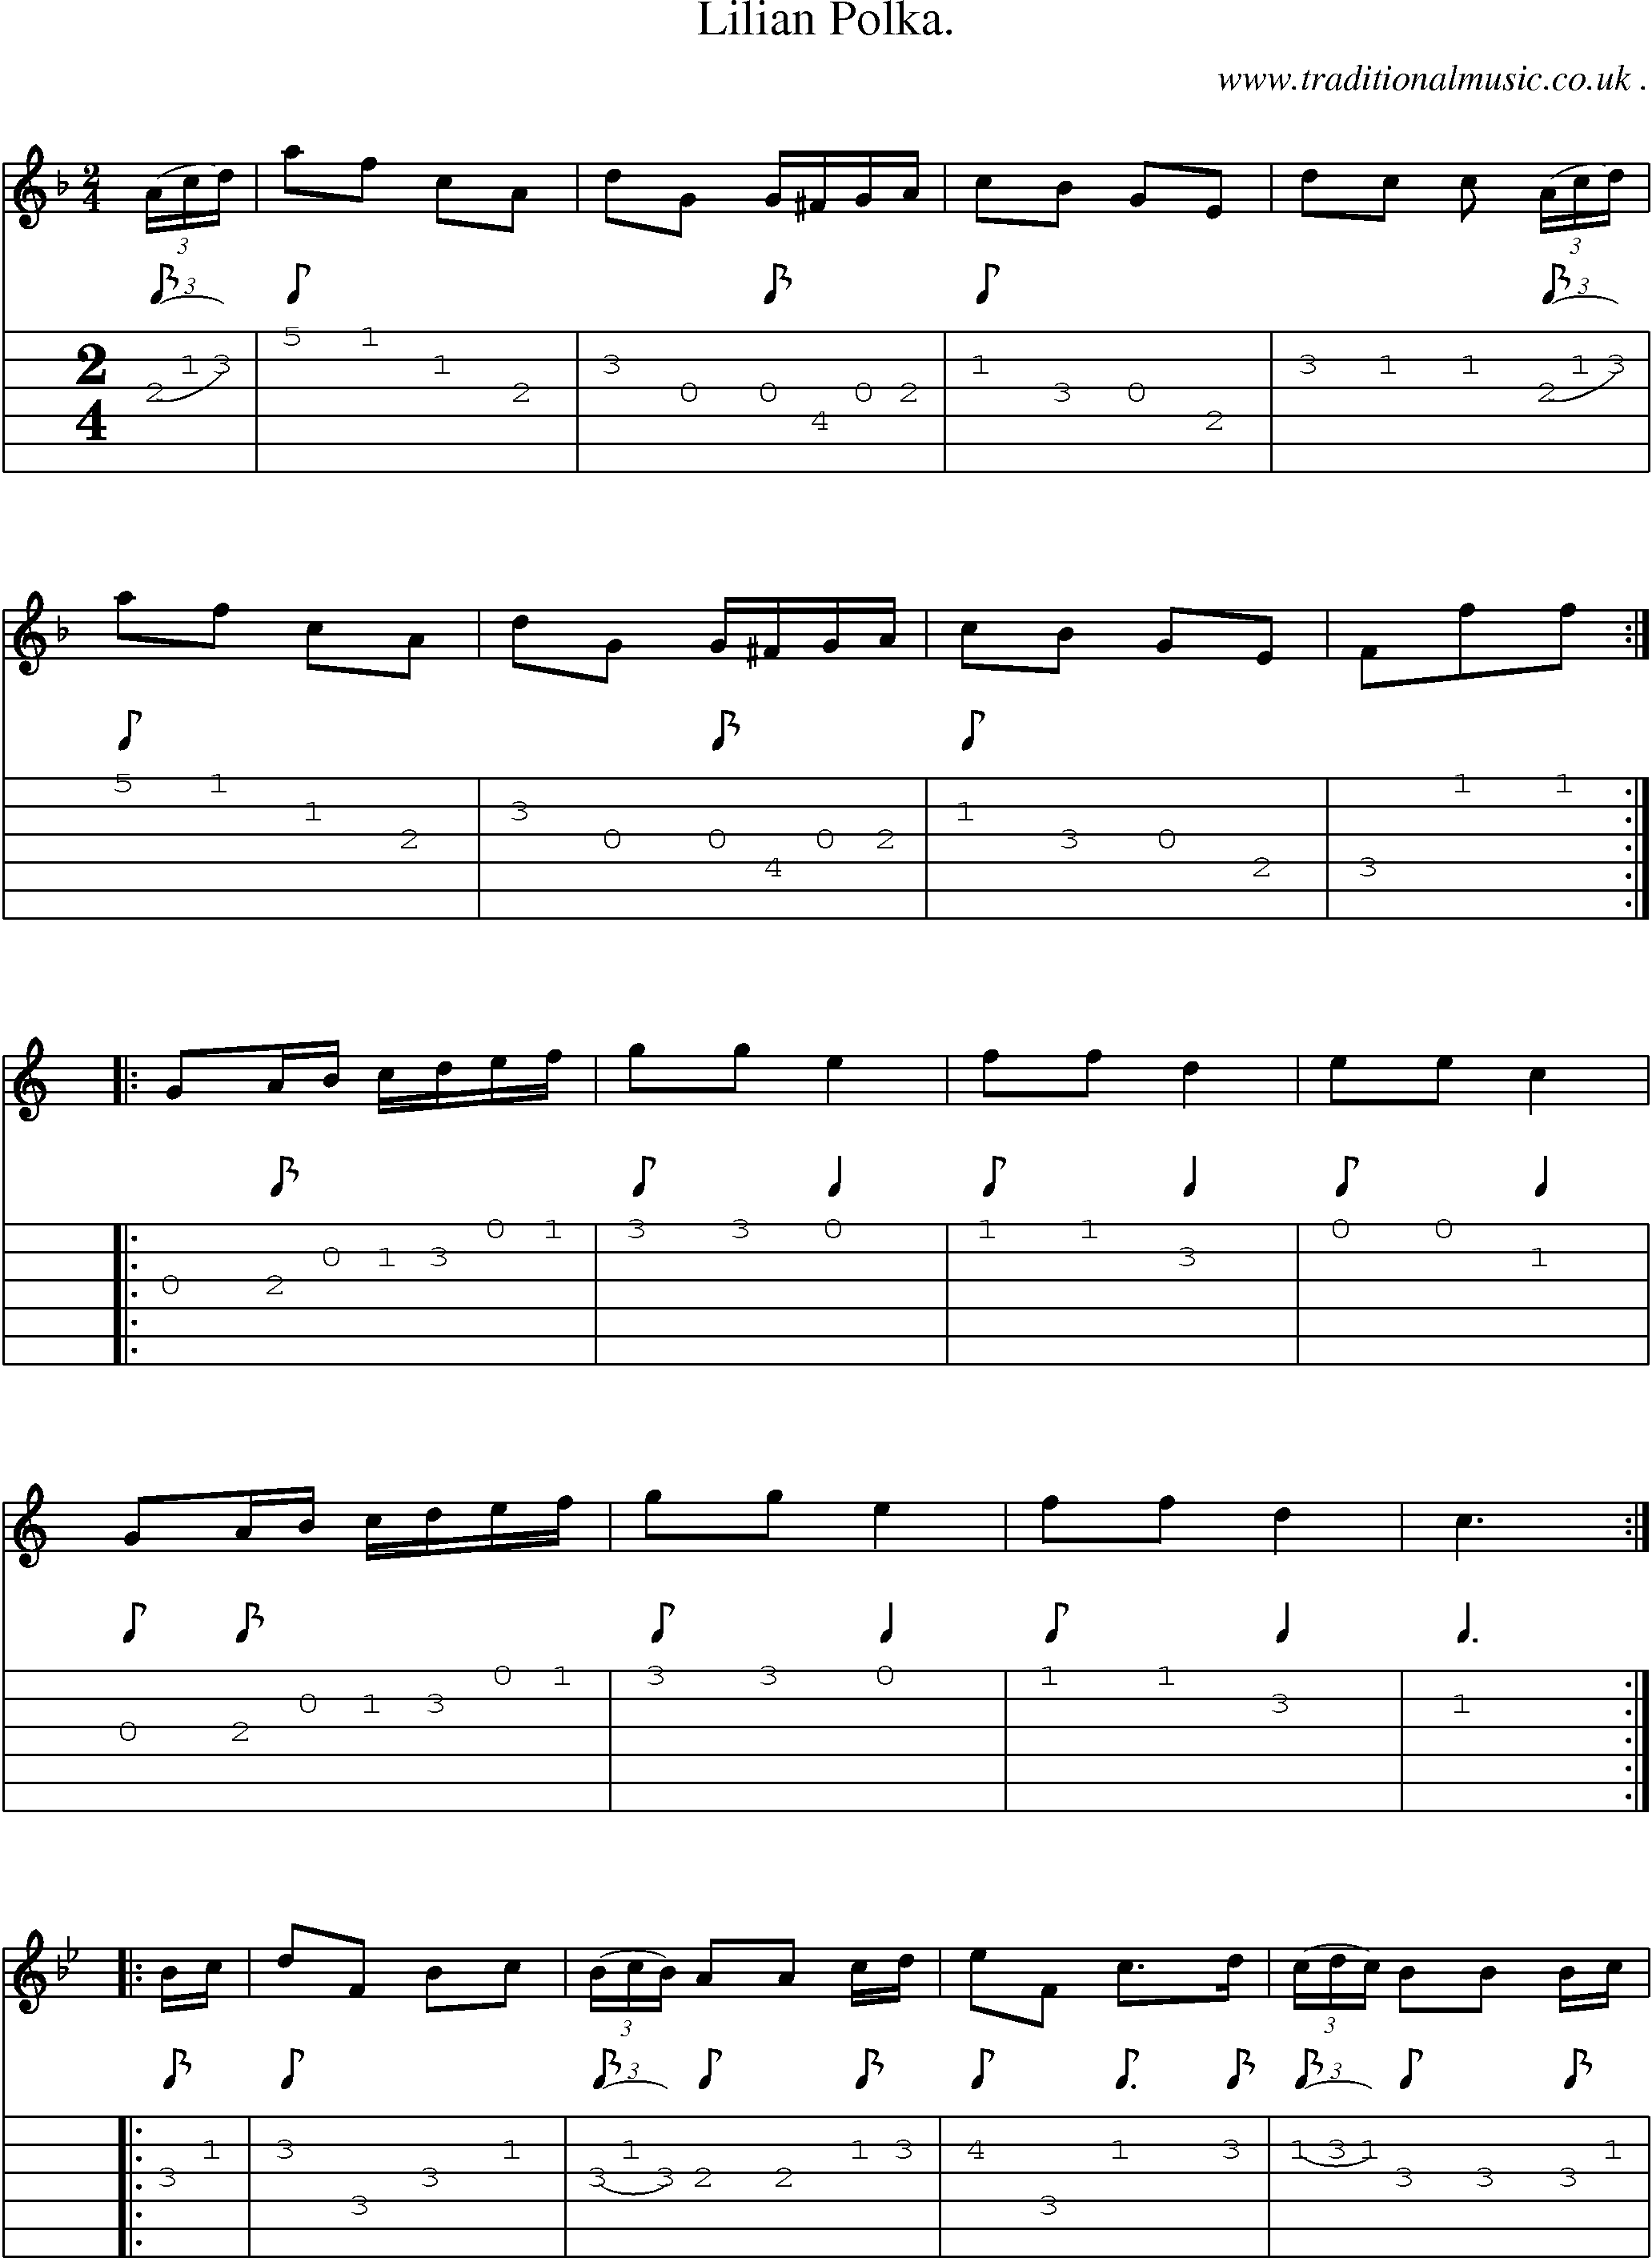 Sheet-Music and Guitar Tabs for Lilian Polka